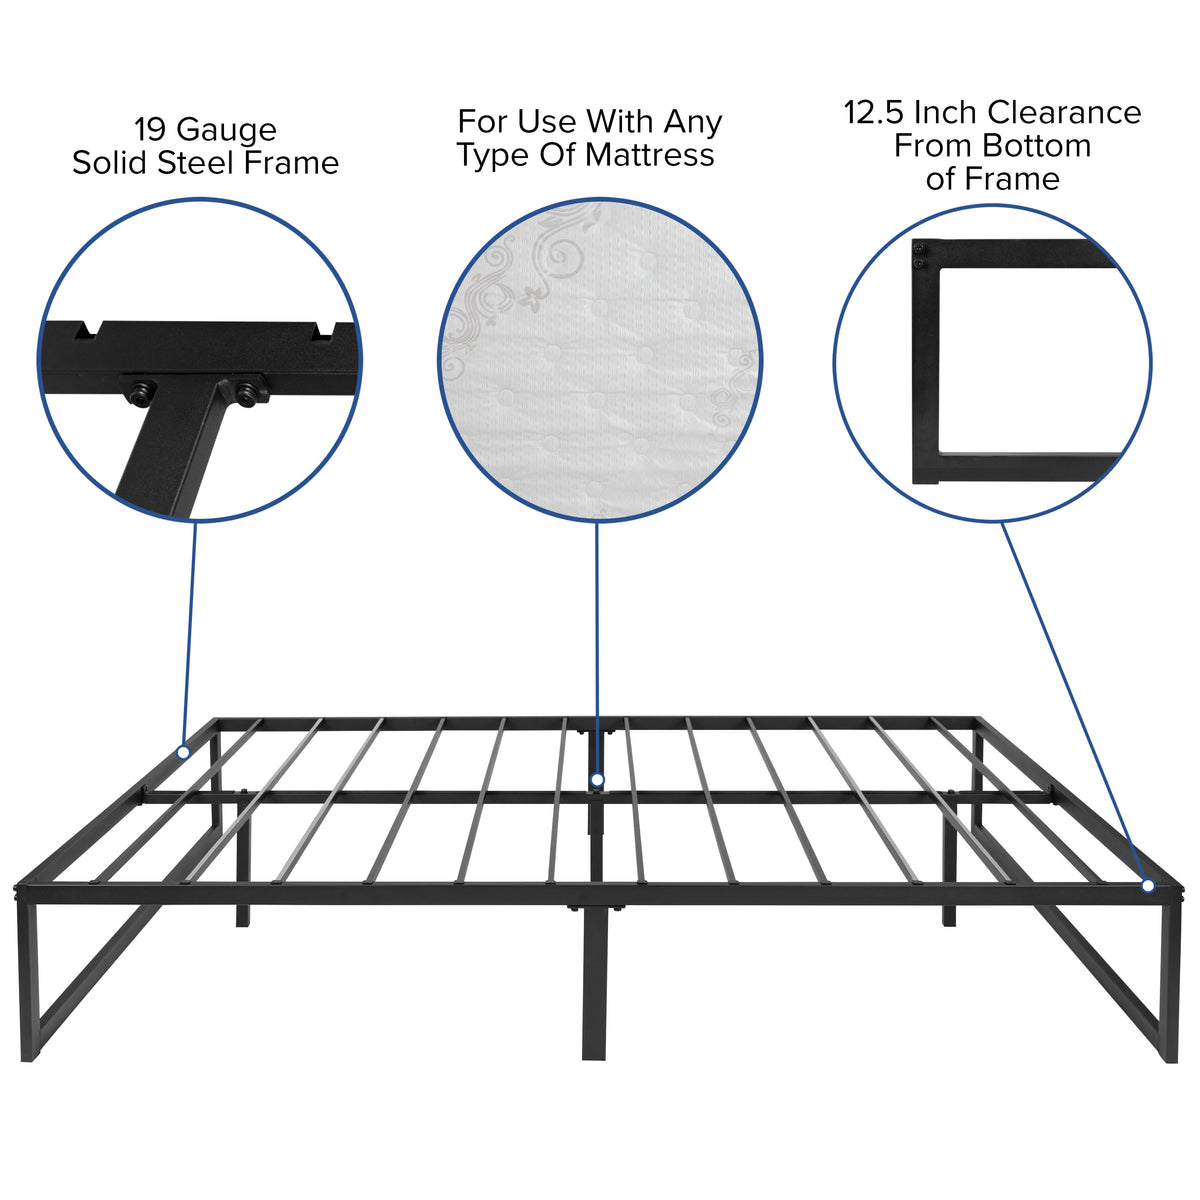 Full |#| 14inch Full Platform Bed Frame & 10inch Mattress in a Box - No Box Spring Required